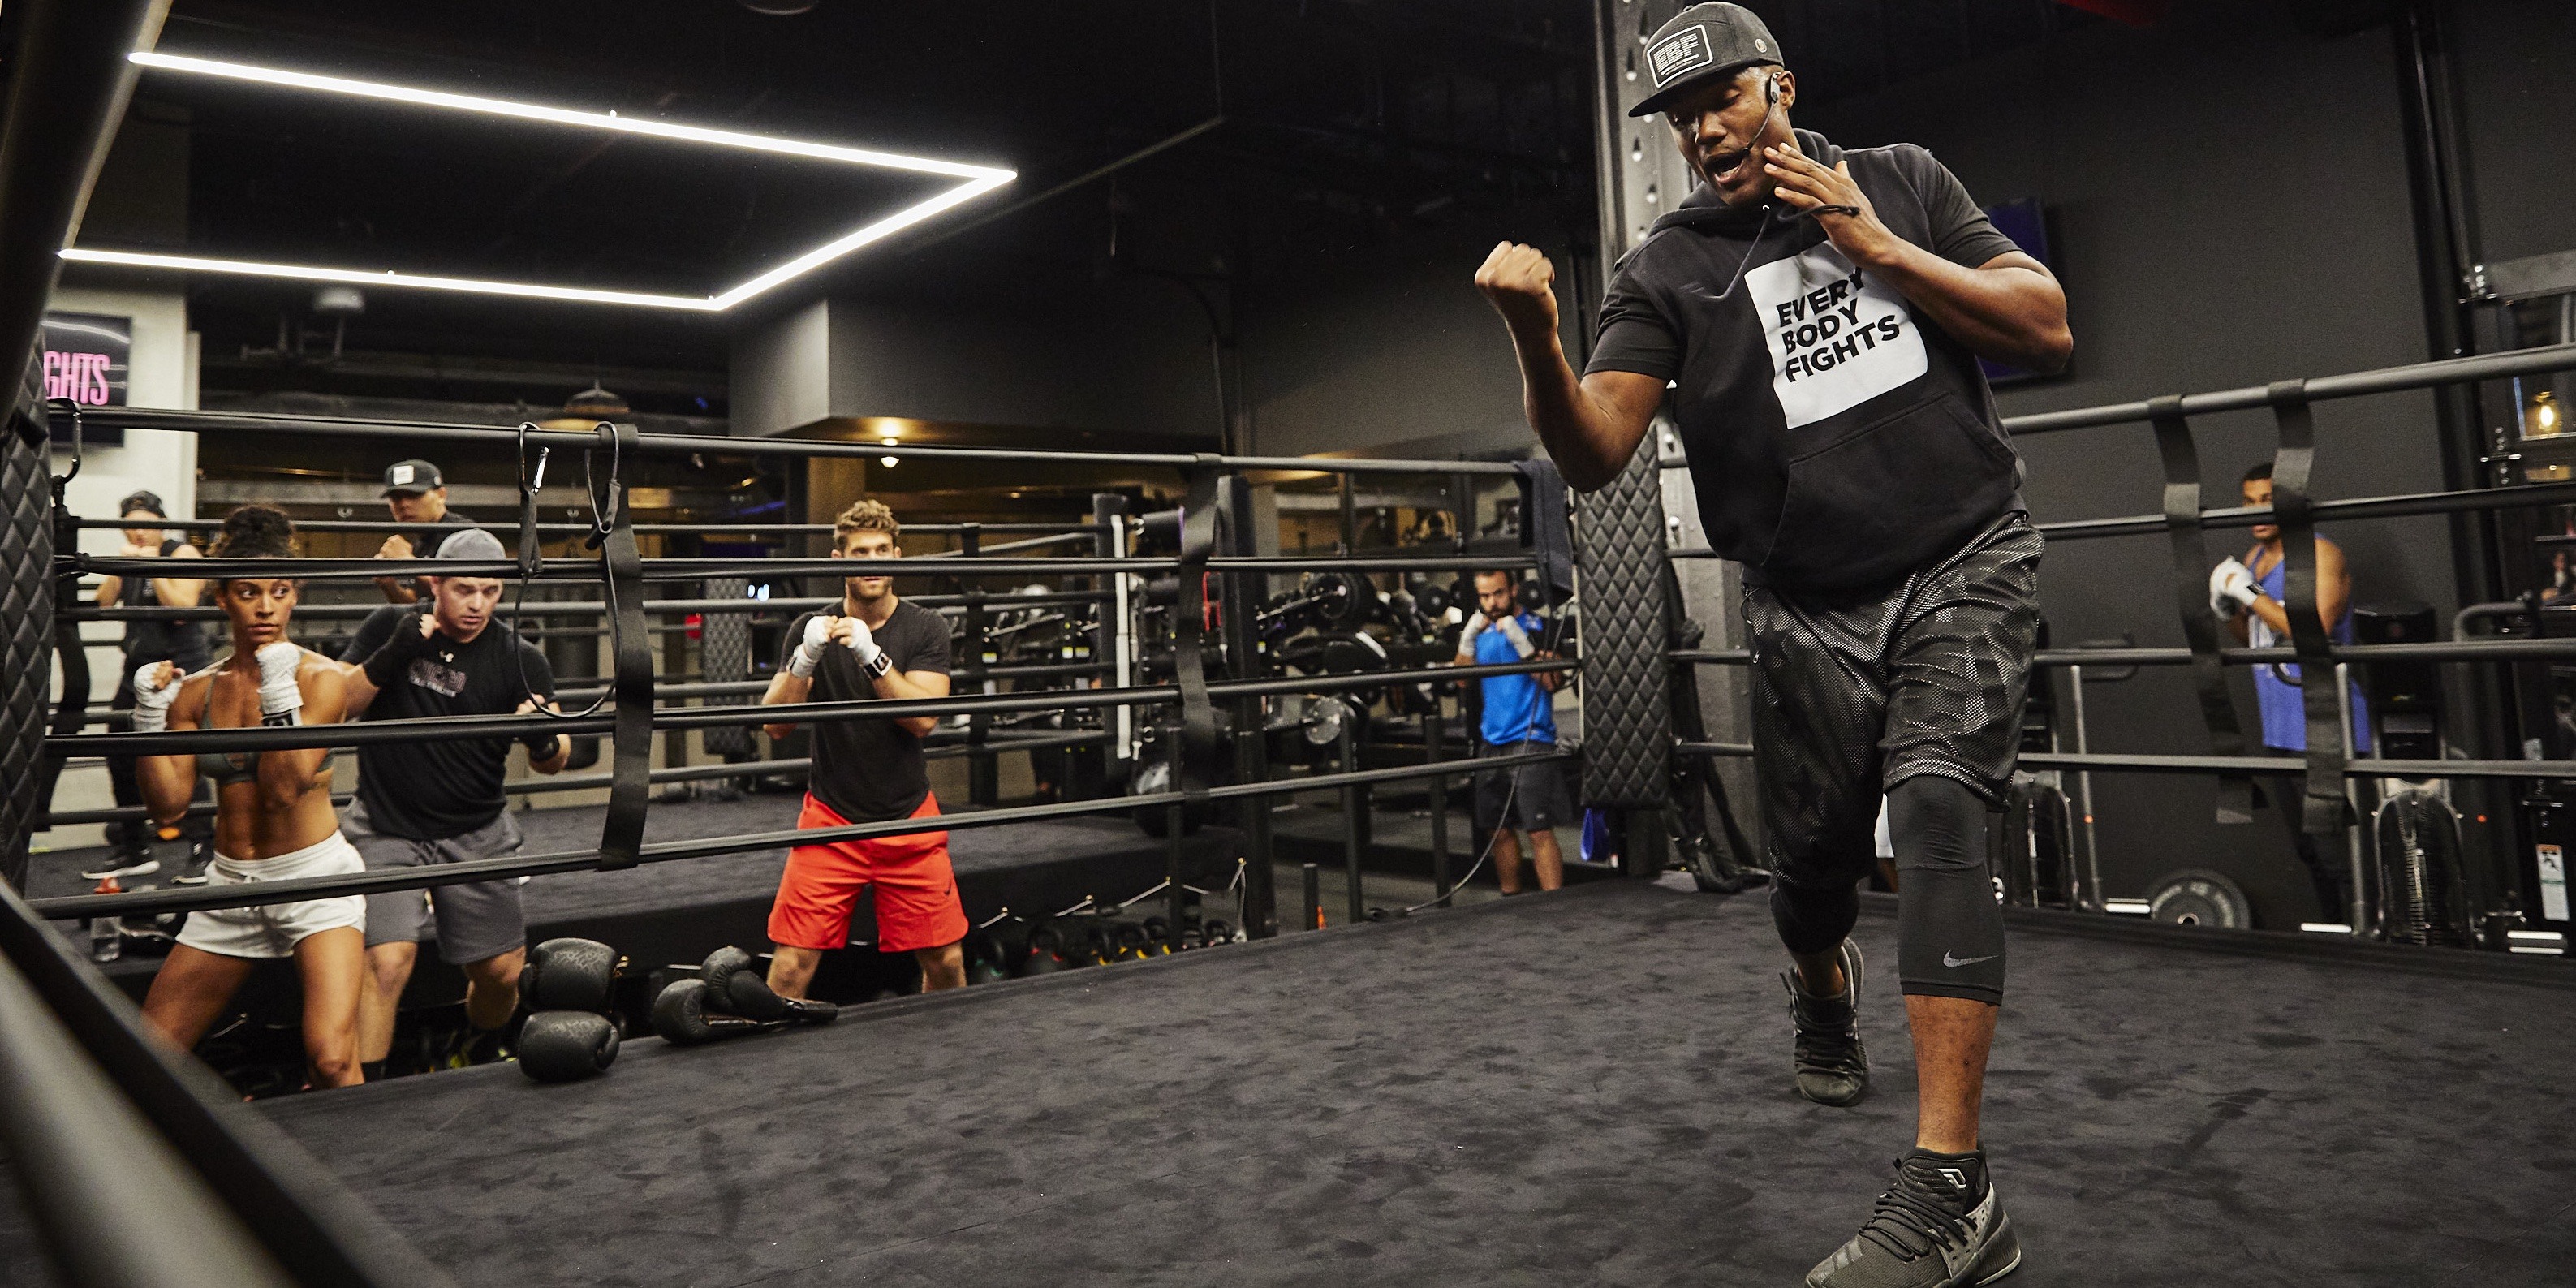 Try a Free EverybodyFights Boxing Class Before Their Philly Gym Opens